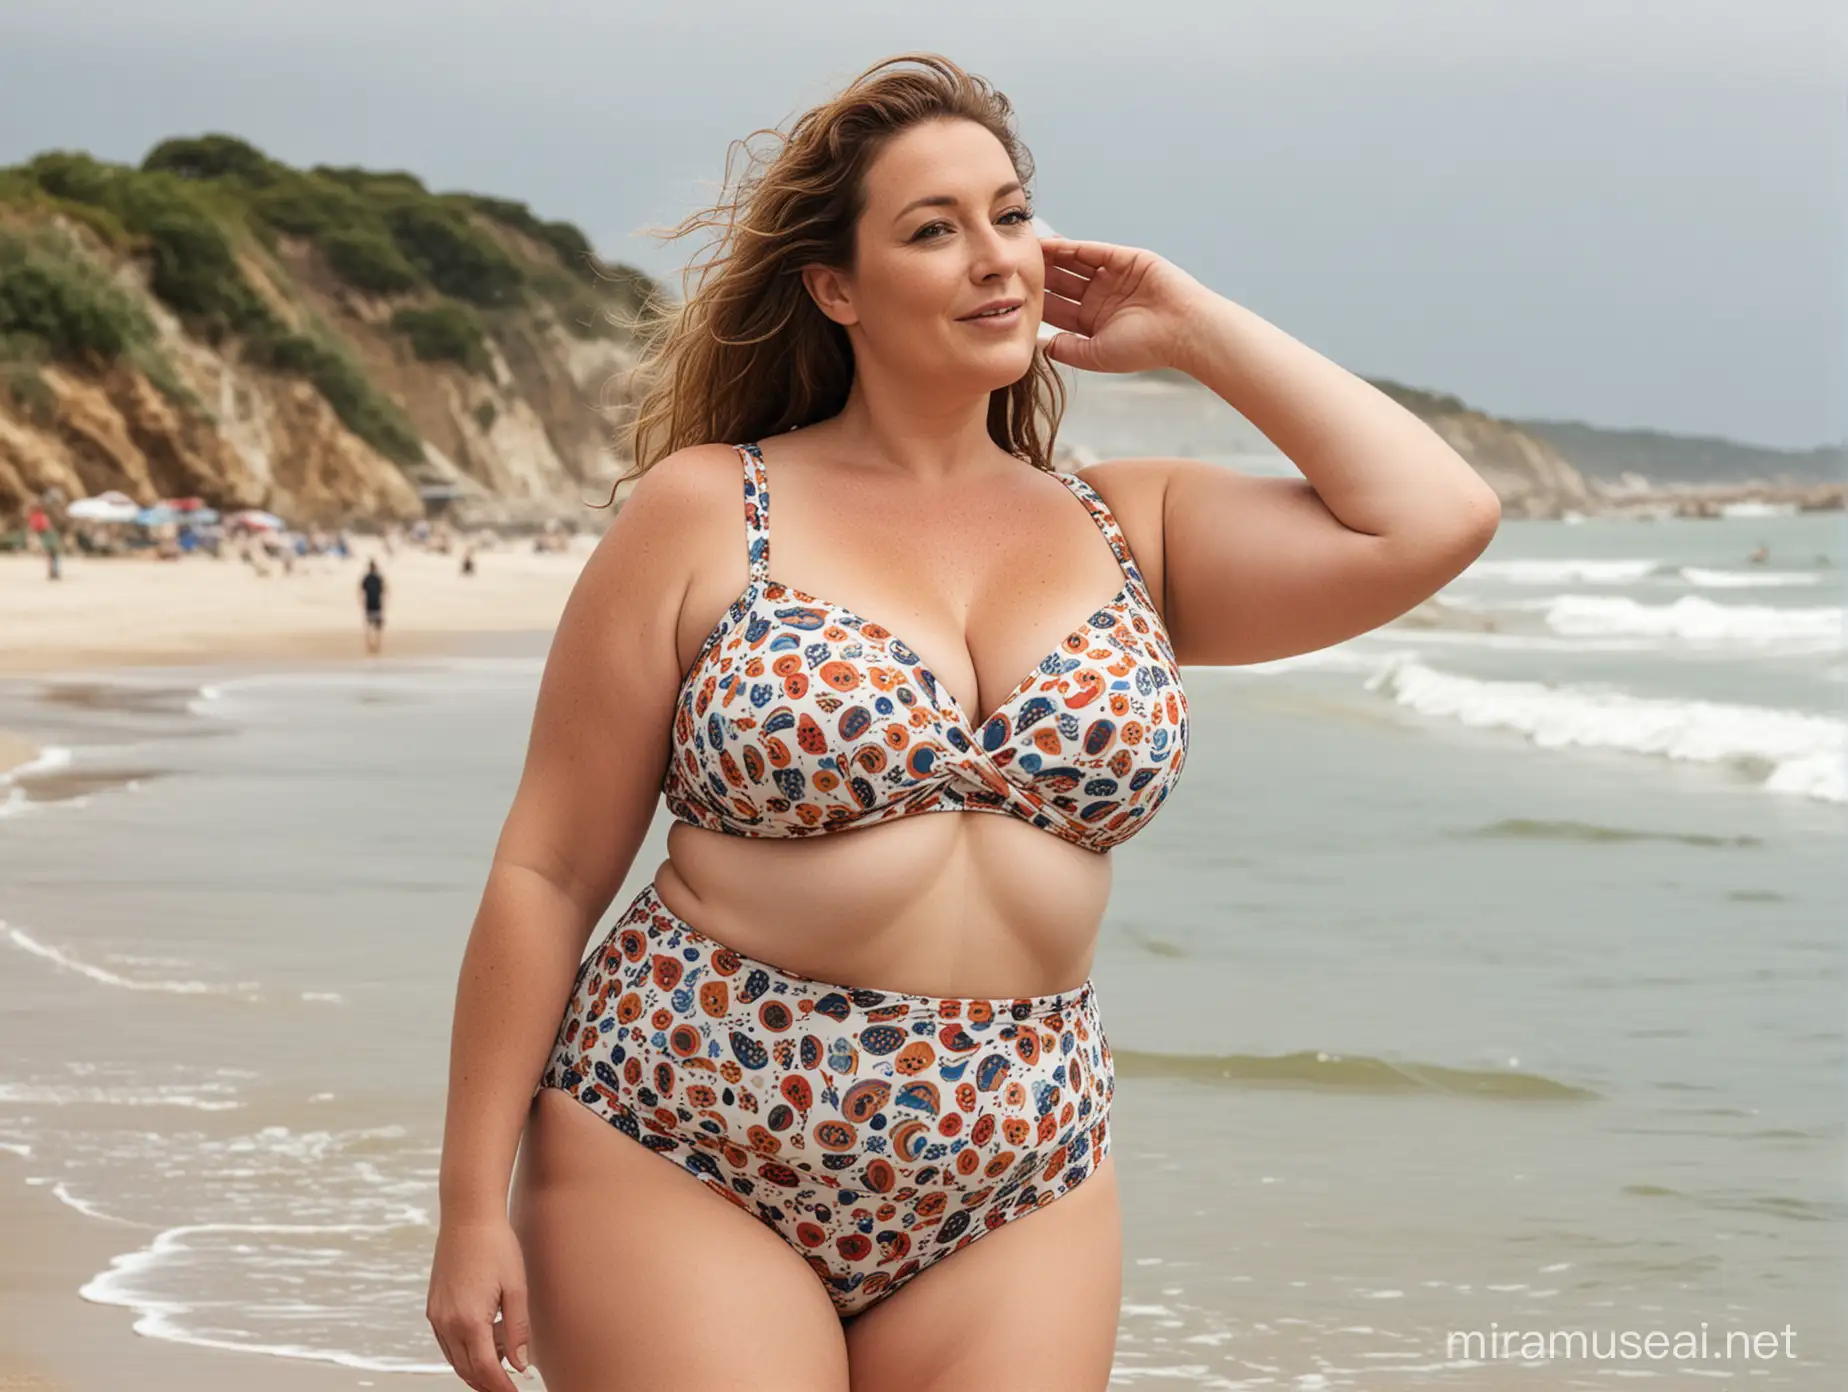 one single plus size woman, aged 50 , curvy, at the beach.